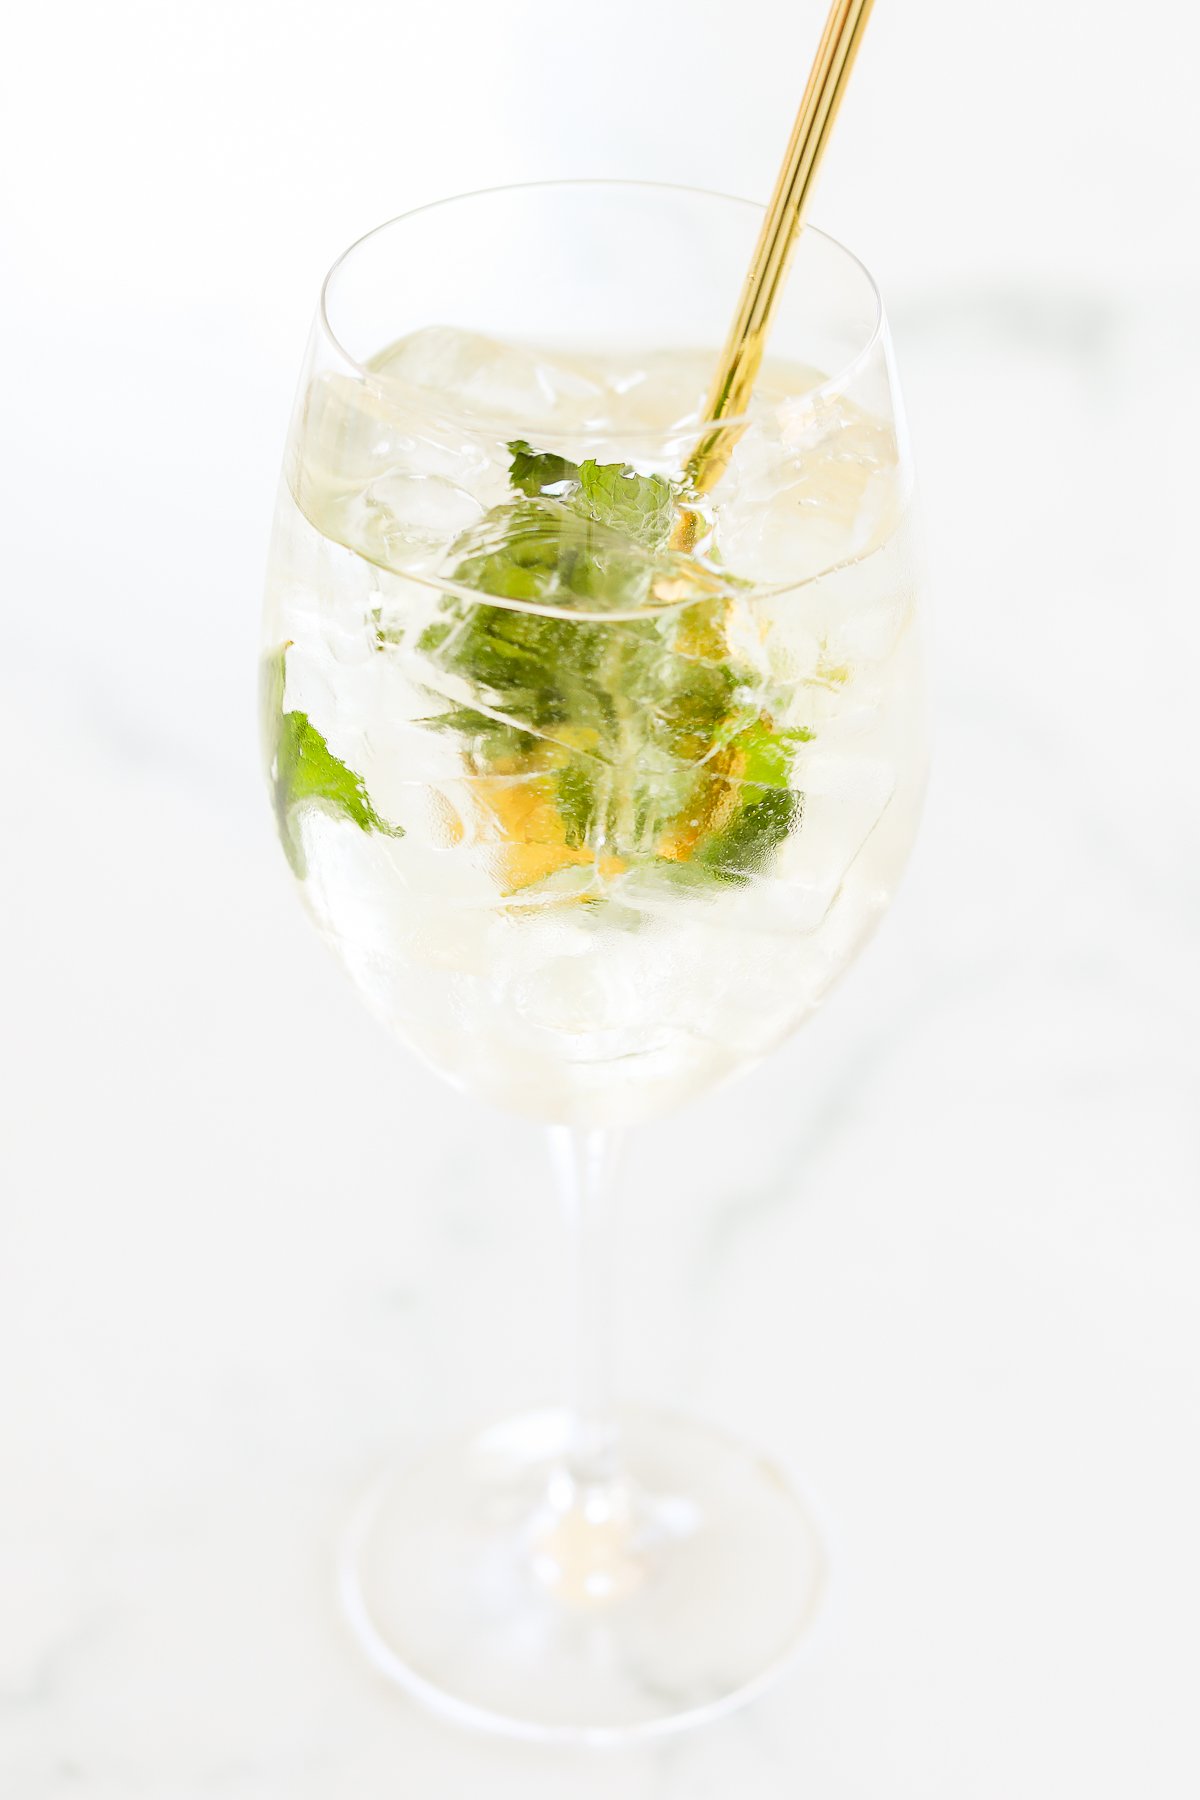 A glass of Hugo spritz garnished with fresh mint on a light background.